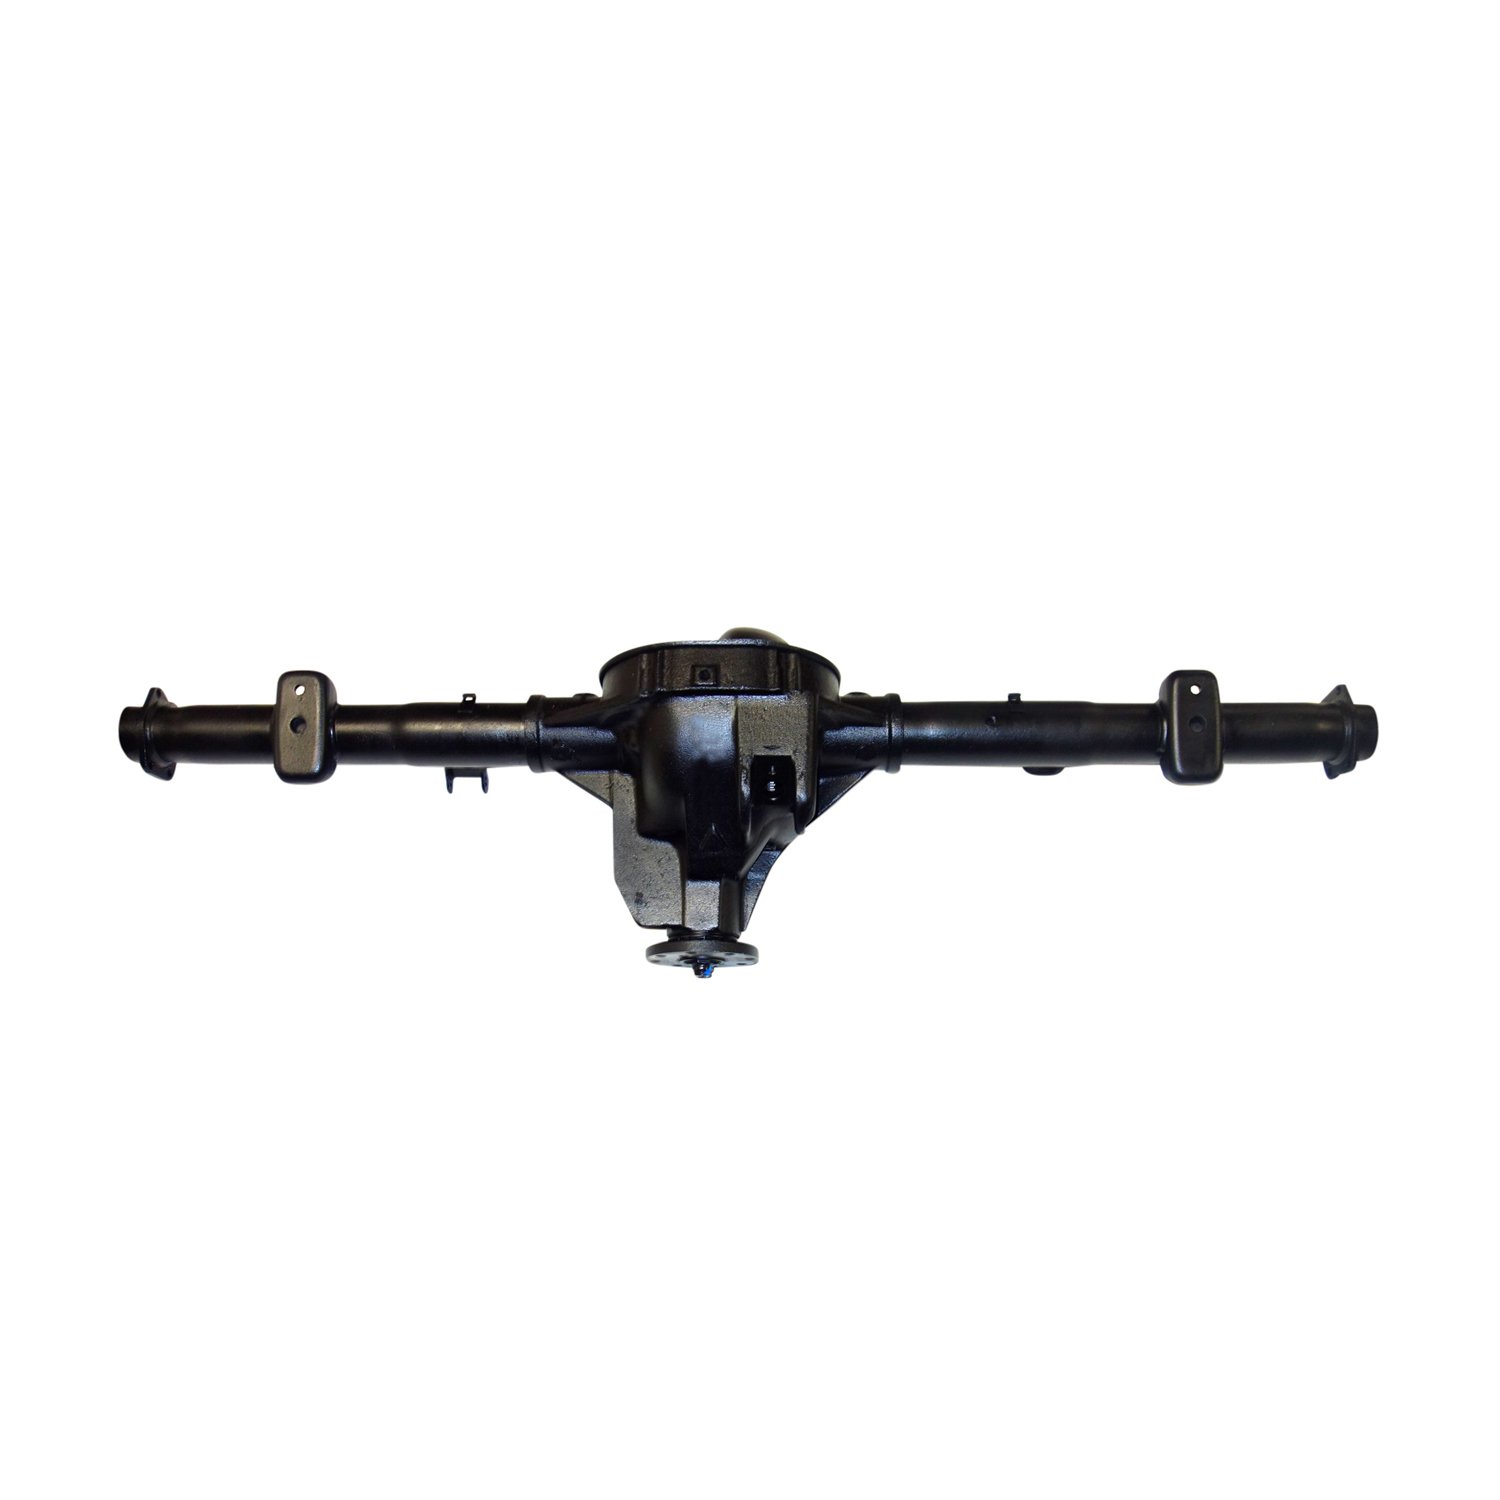 Remanufactured Axle Assy for 8.8" 91-94 & Mazda Explorer & Navajo 3.08 w/ ABS, Posi LSD